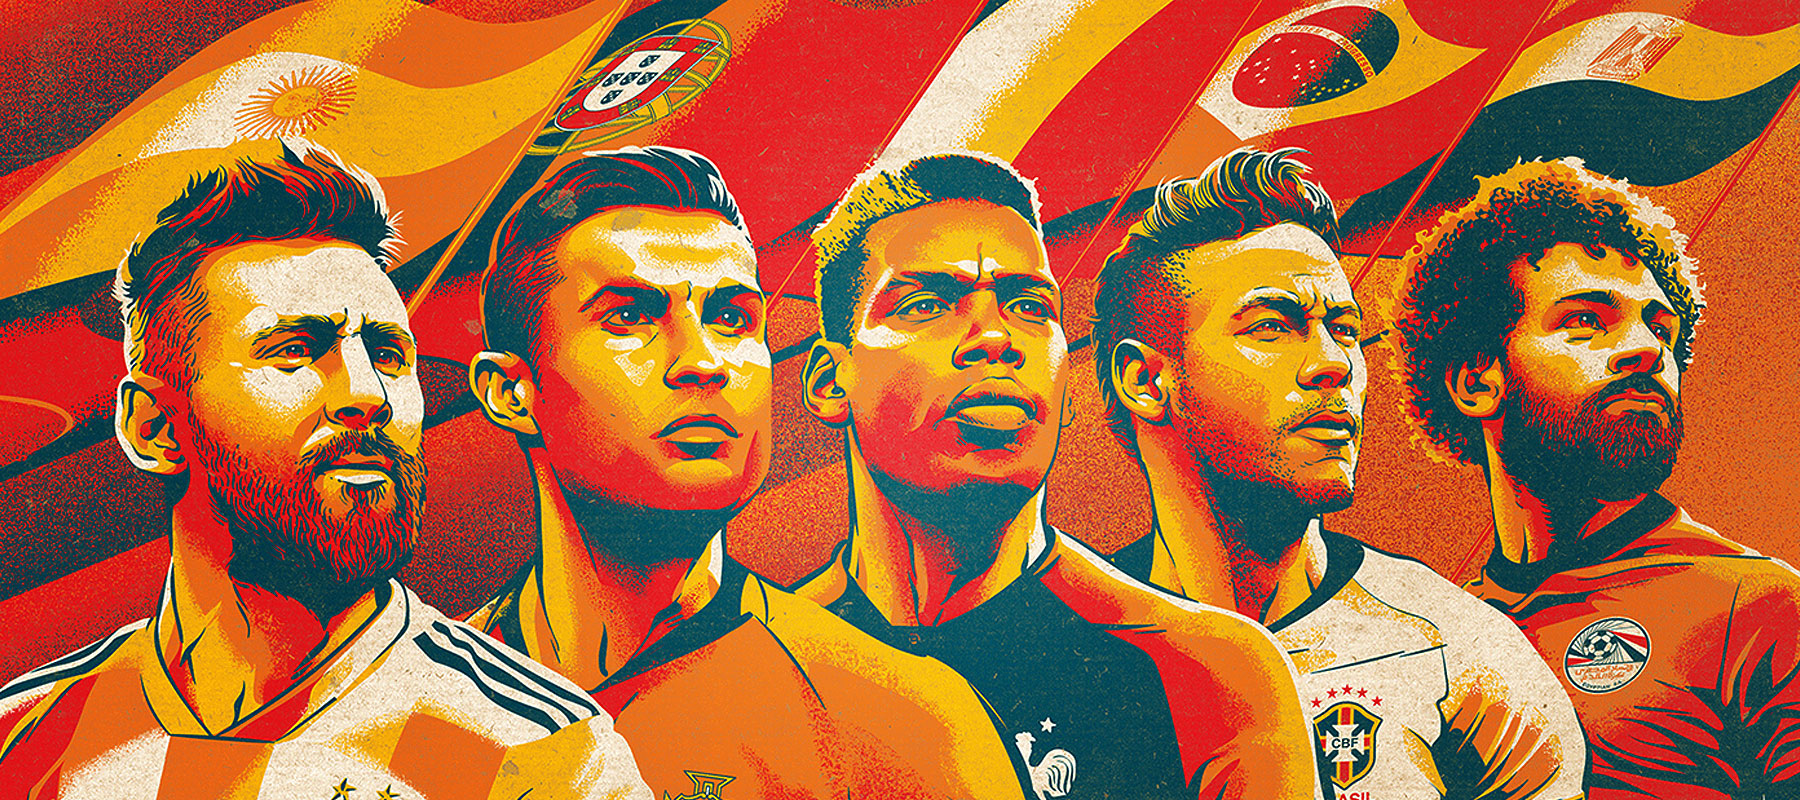 FIFA World Cup Russia 2018 Illustrations